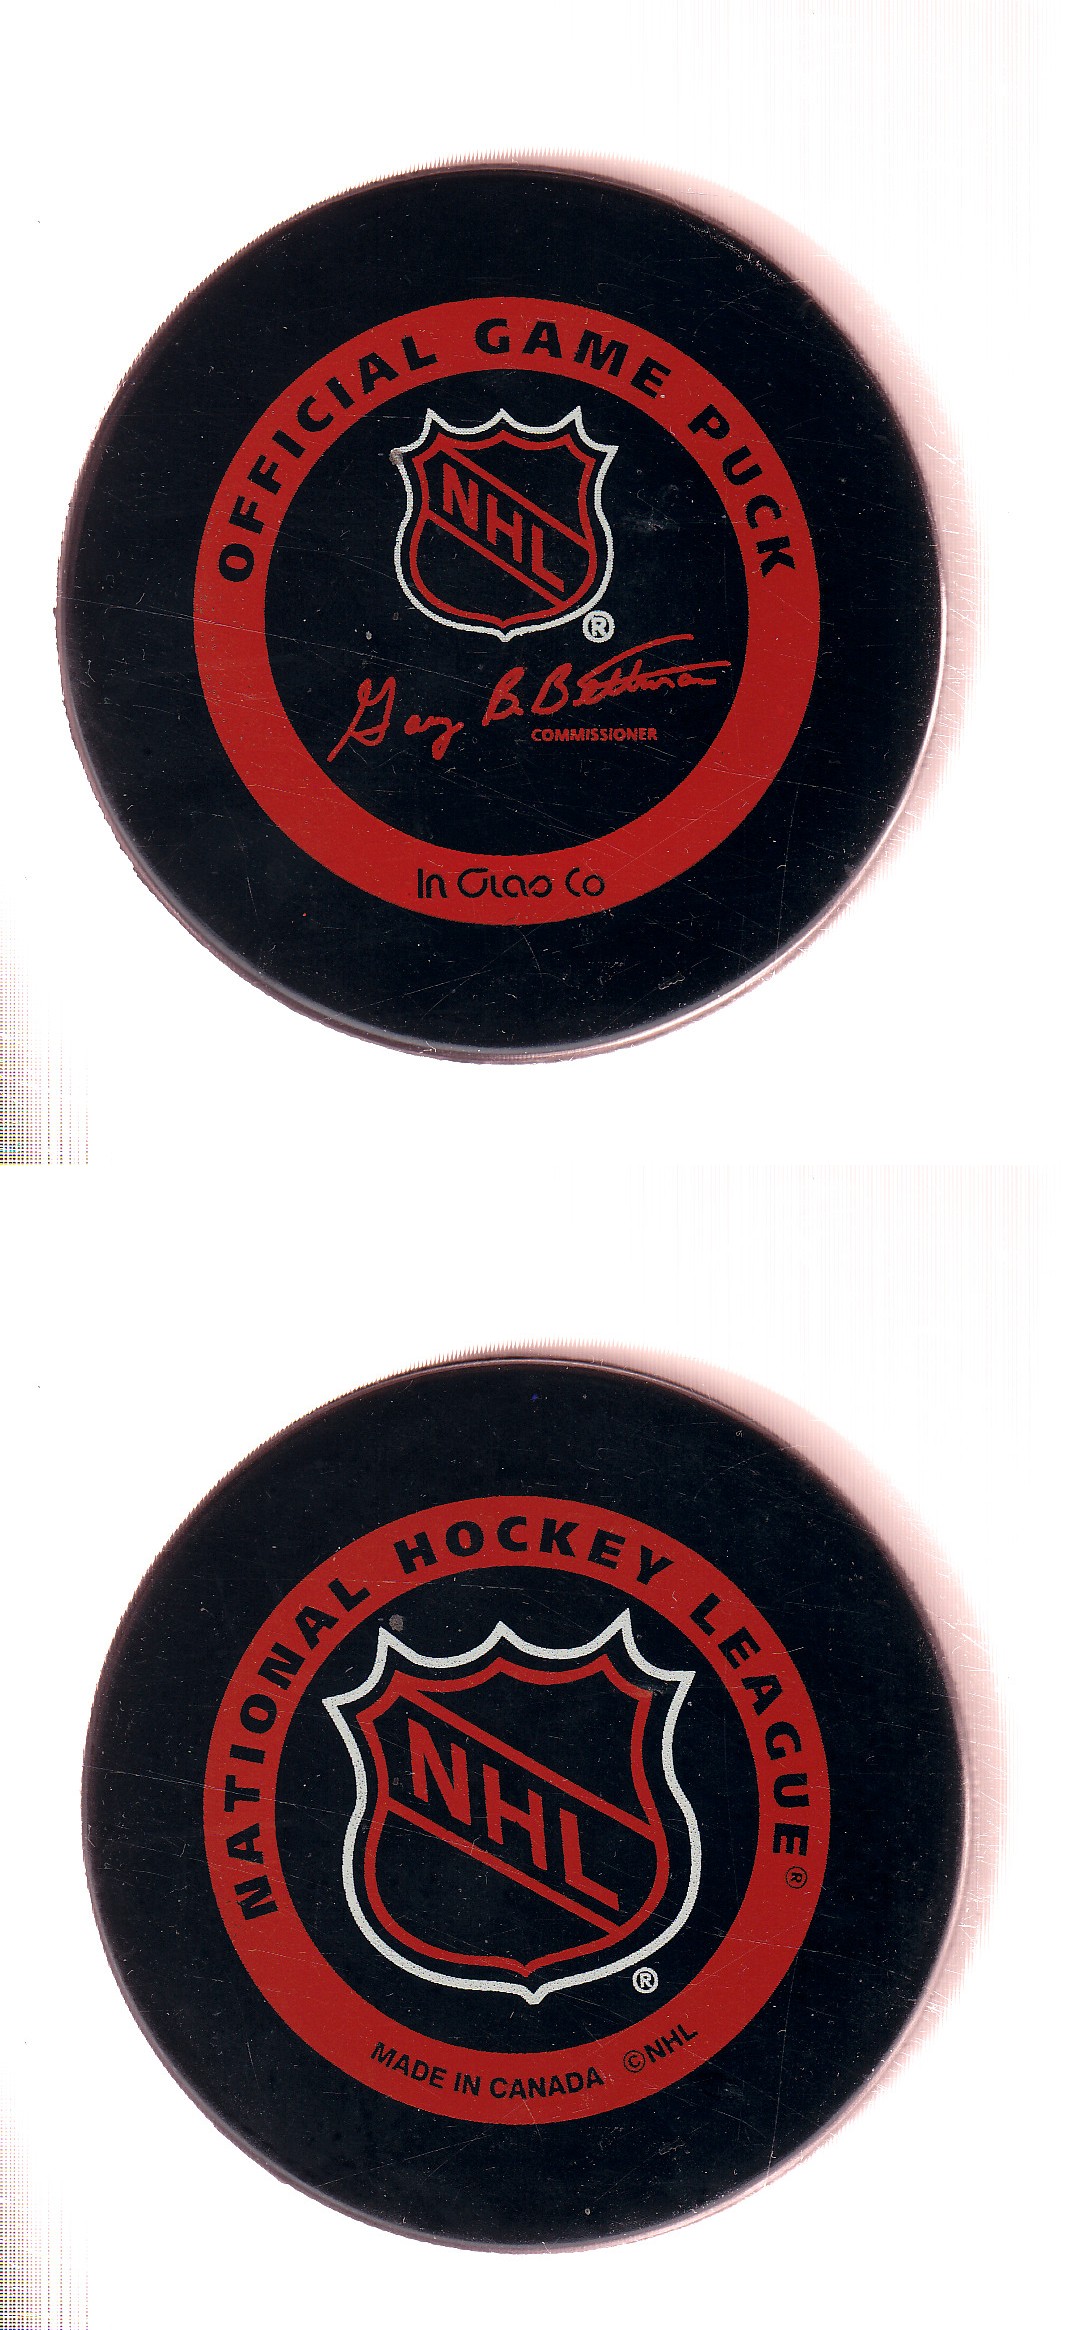 1995-96 IN GLAS CO NHL GAME PUCK photo